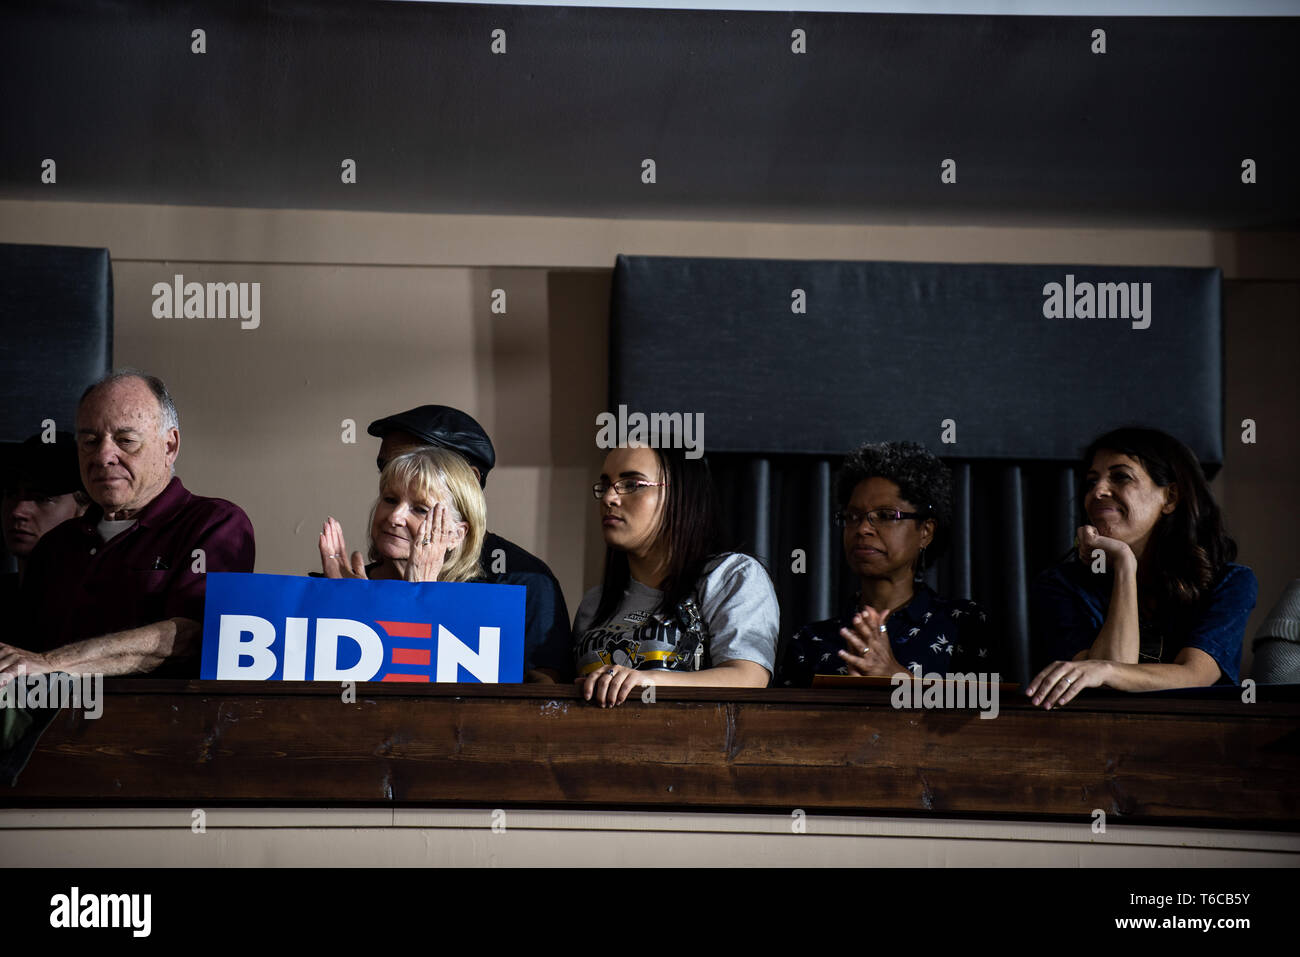 Biden supporters seen during the event. Speeches come before Joe Biden takes the stage in Pittsburgh. Joe Biden is running to be the Democratic Nominee for the 2020 presidential election. Stock Photo